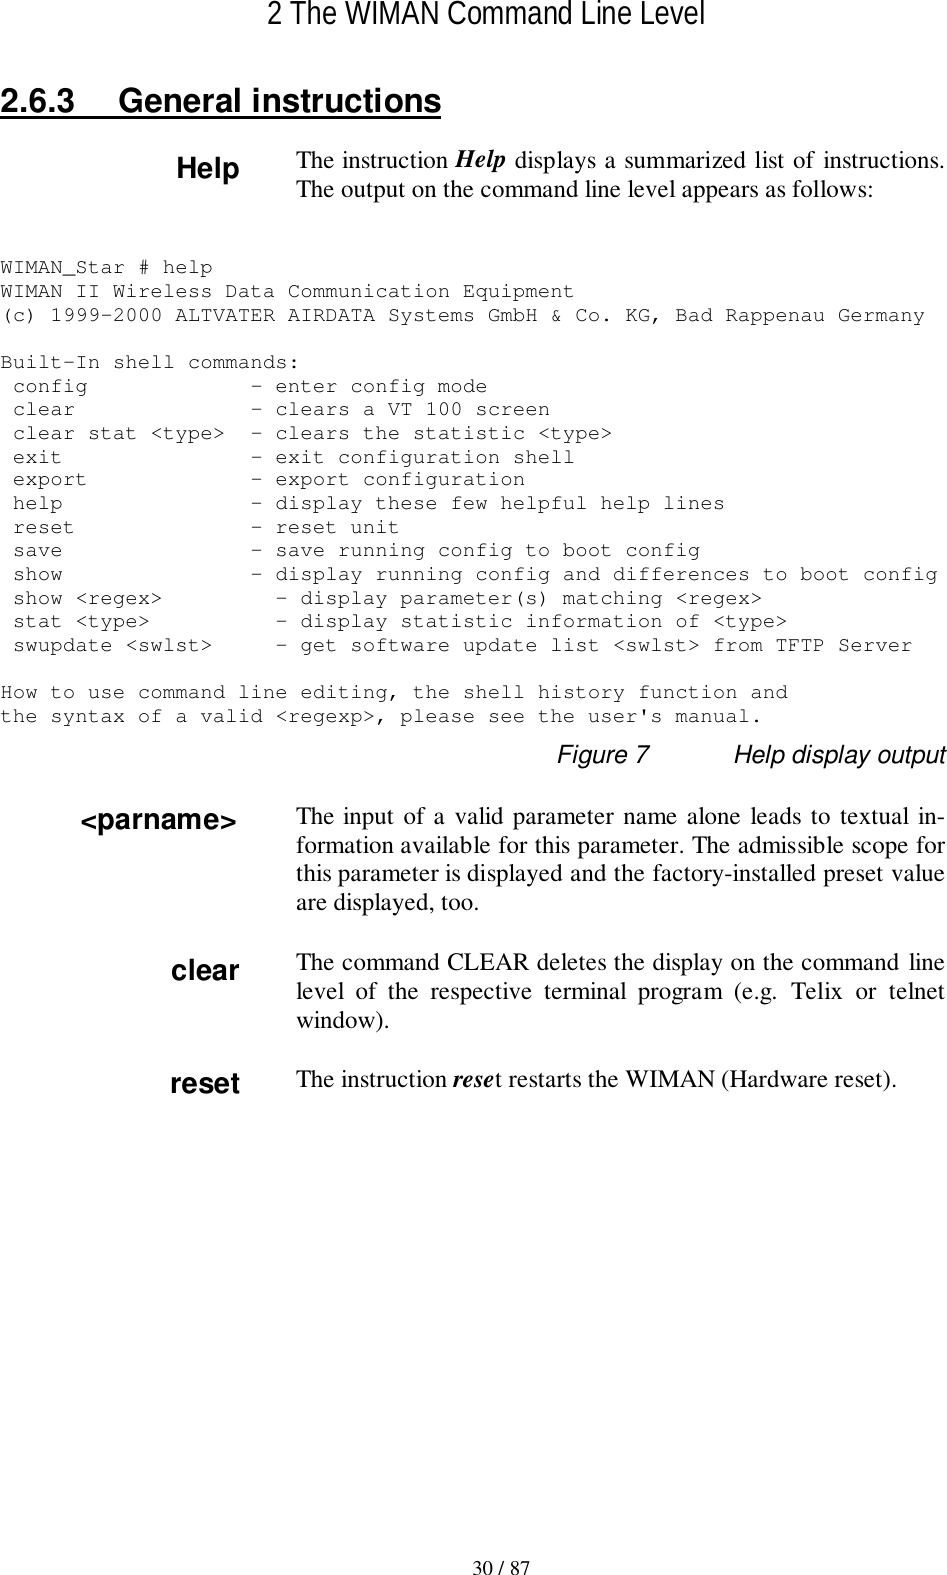 2 The WIMAN Command Line Level30 / 872.6.3 General instructionsThe instruction Help displays a summarized list of instructions.The output on the command line level appears as follows:WIMAN_Star # helpWIMAN II Wireless Data Communication Equipment(c) 1999-2000 ALTVATER AIRDATA Systems GmbH &amp; Co. KG, Bad Rappenau GermanyBuilt-In shell commands: config             - enter config mode clear              - clears a VT 100 screen clear stat &lt;type&gt;  - clears the statistic &lt;type&gt; exit               - exit configuration shell export             - export configuration help               - display these few helpful help lines reset              - reset unit save               - save running config to boot config show               - display running config and differences to boot config show &lt;regex&gt;         - display parameter(s) matching &lt;regex&gt; stat &lt;type&gt;          - display statistic information of &lt;type&gt; swupdate &lt;swlst&gt;     - get software update list &lt;swlst&gt; from TFTP ServerHow to use command line editing, the shell history function andthe syntax of a valid &lt;regexp&gt;, please see the user&apos;s manual.Figure 7 Help display outputThe input of a valid parameter name alone leads to textual in-formation available for this parameter. The admissible scope forthis parameter is displayed and the factory-installed preset valueare displayed, too.The command CLEAR deletes the display on the command linelevel of the respective terminal program (e.g. Telix or telnetwindow).The instruction reset restarts the WIMAN (Hardware reset).&lt;parname&gt;resetHelpclear